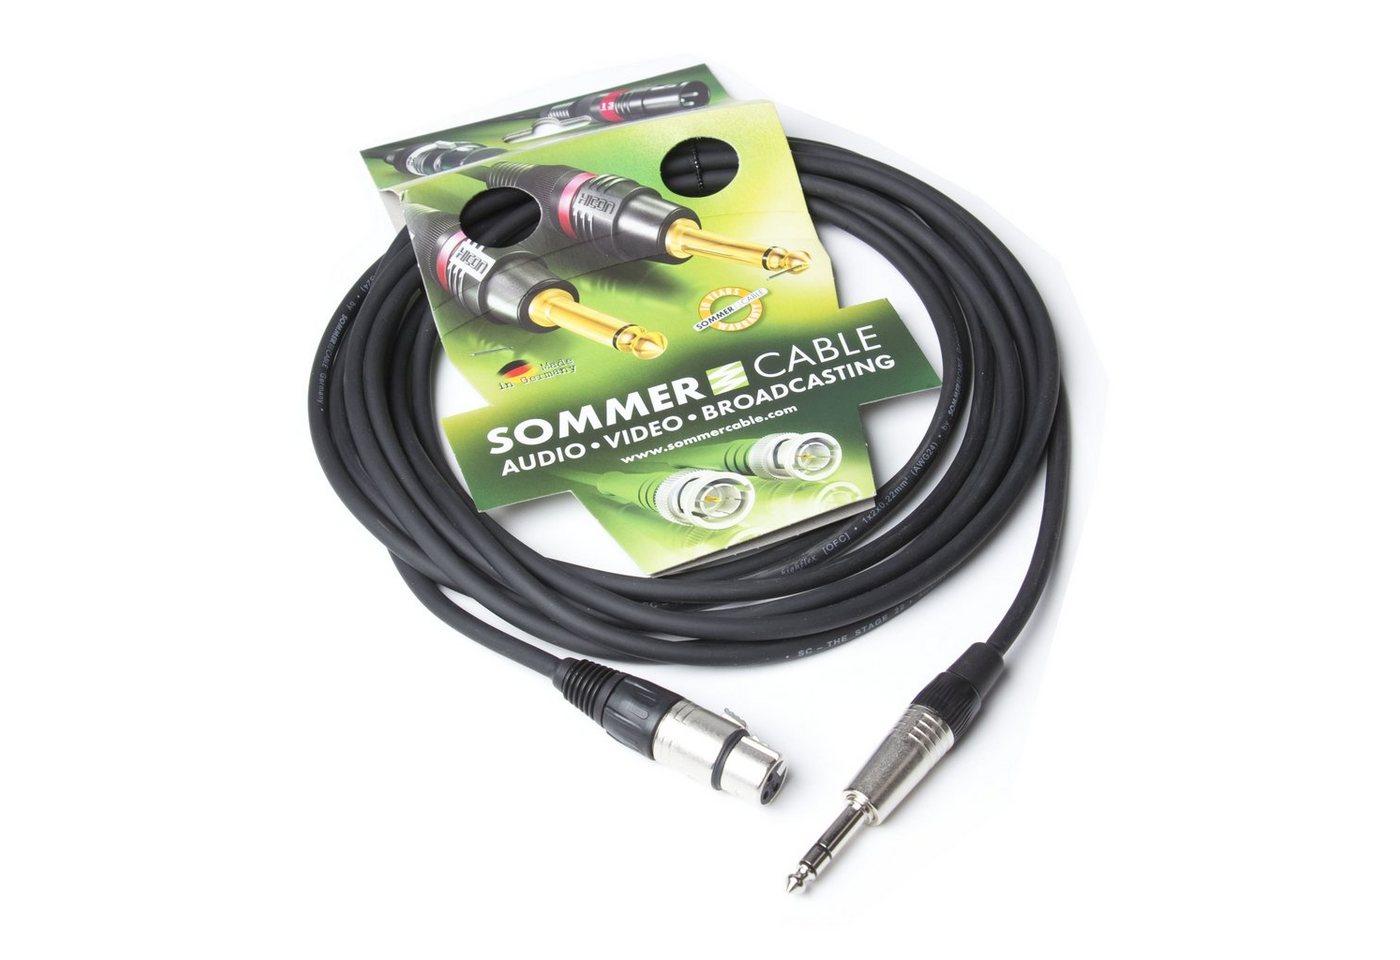 Sommer Cable Audio-Kabel, SG05-0500-SW Stage 22 Mikrofonkabel 5 m - Mikrofonkabel von Sommer Cable